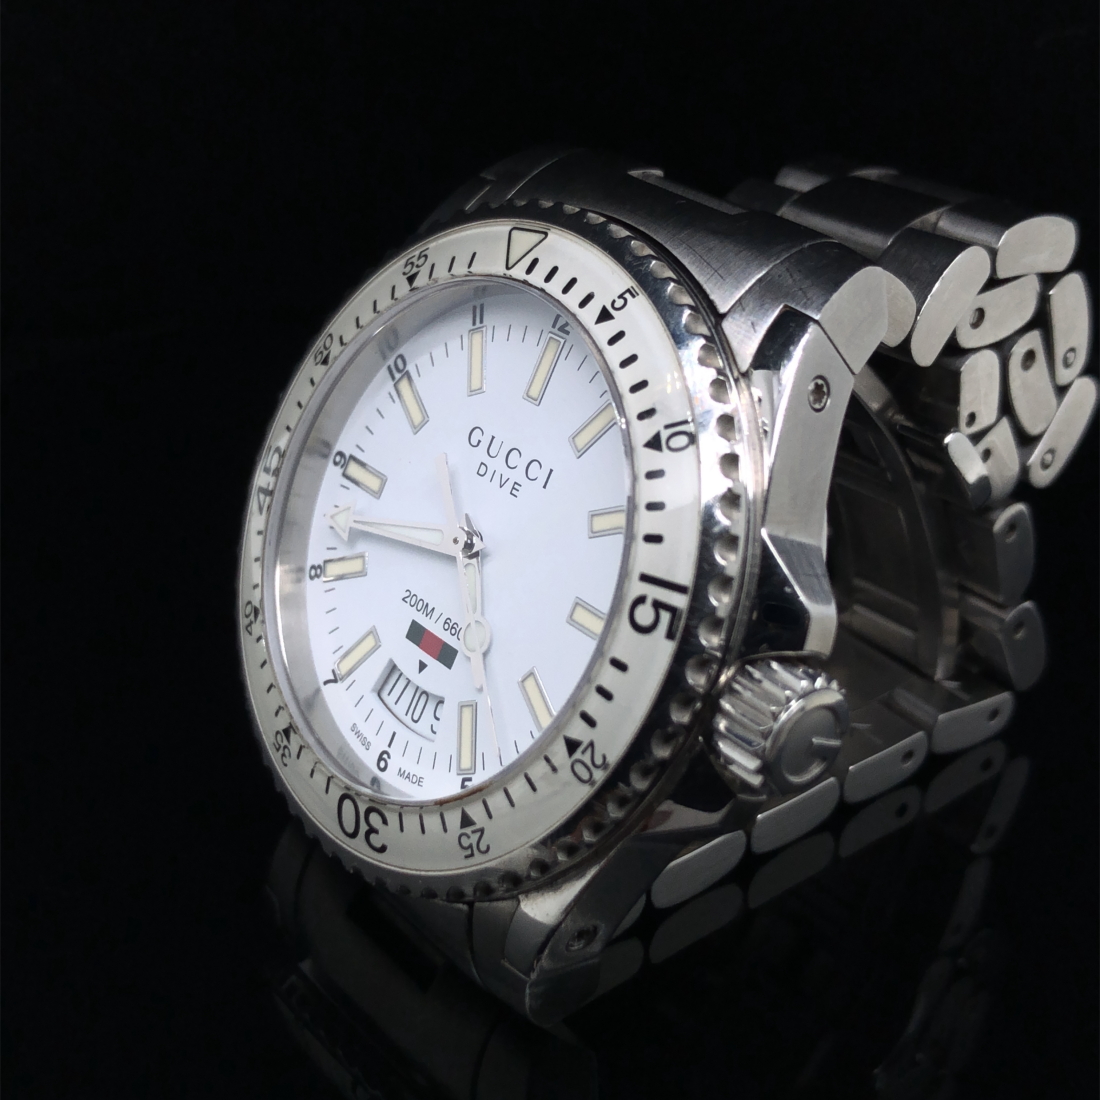 A GUCCI DIVE WATCH, WHITE DIAL AND BATONS, ON A STAINLESS STEEL BRACELET STRAP WITH A BUTTERFLY - Image 4 of 6